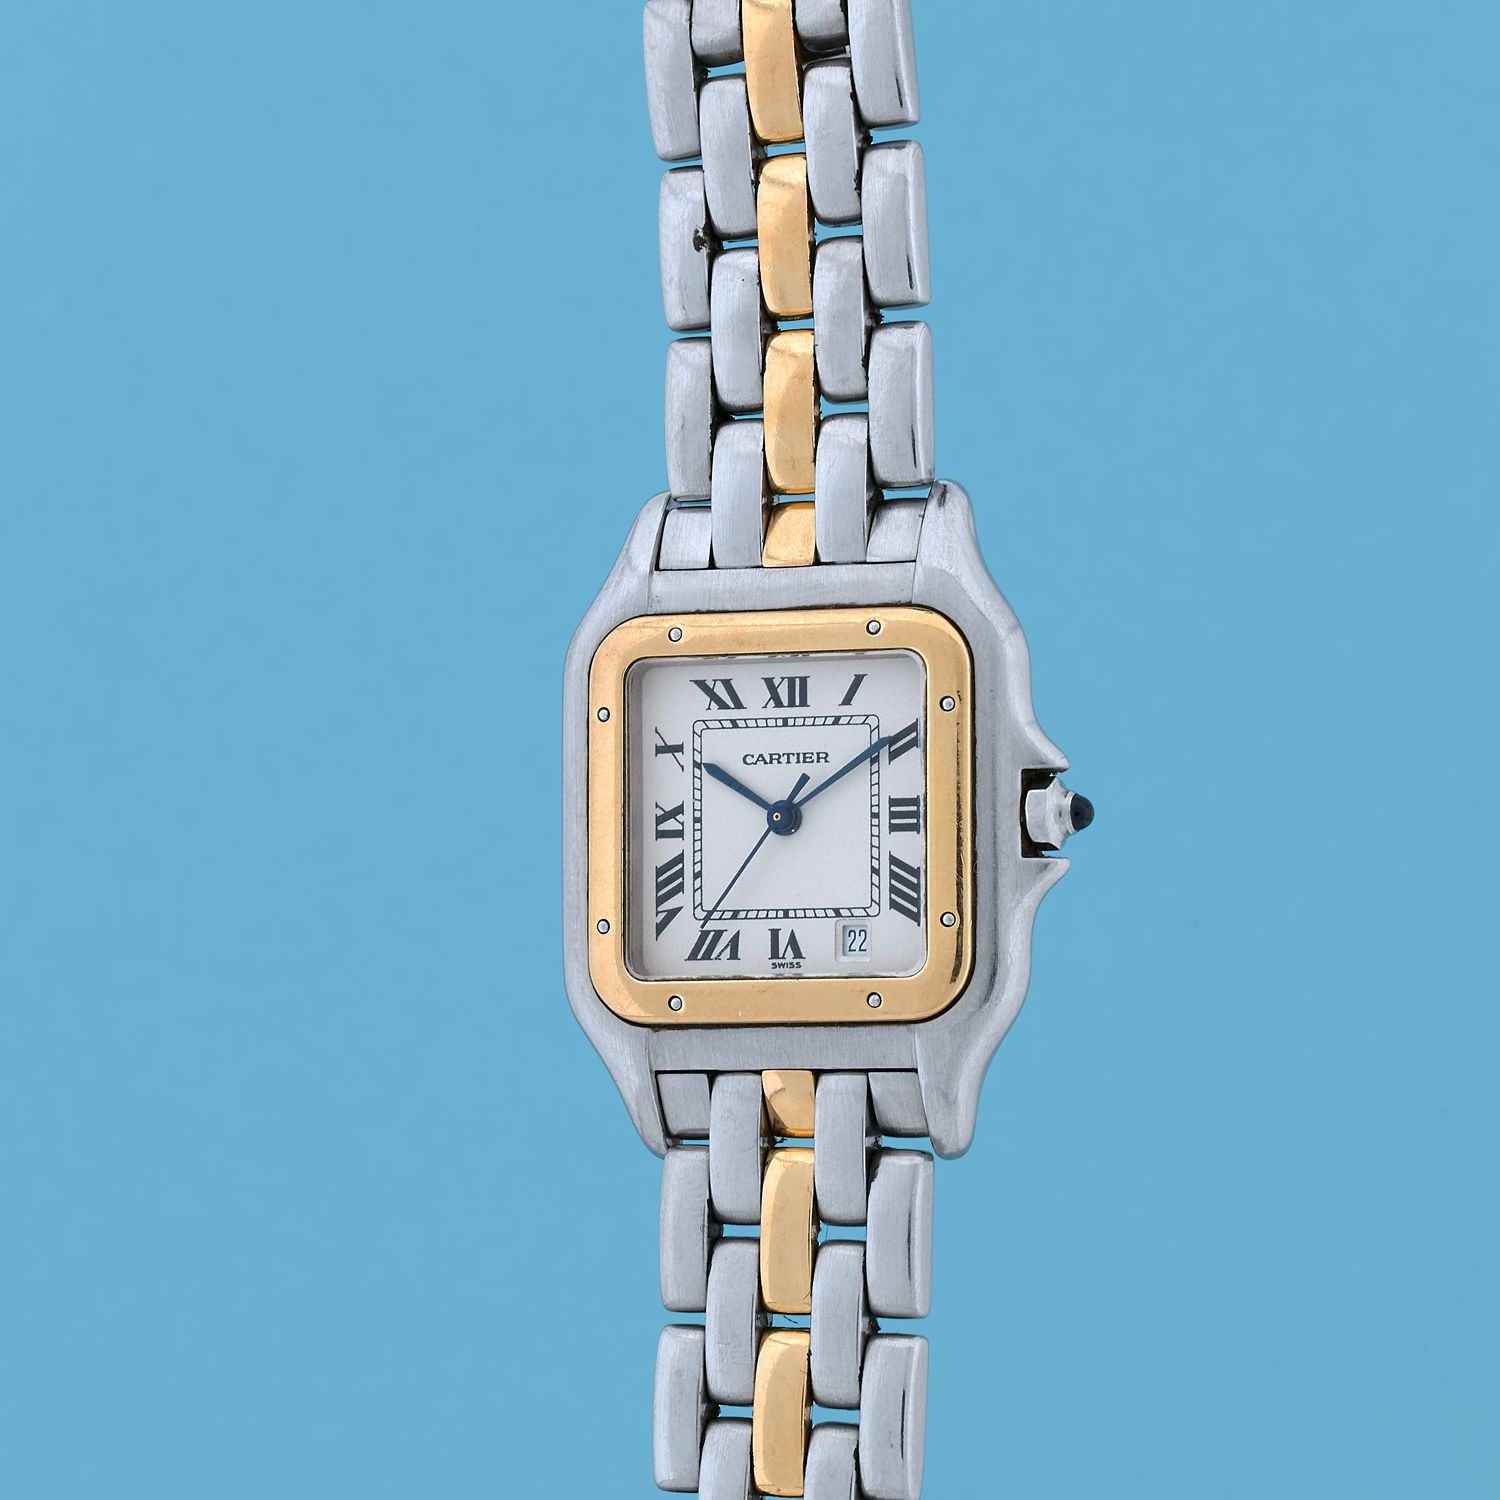 Null CARTIER
Panther.
About 1990.
Gold and steel bracelet watch. Square case, si&hellip;